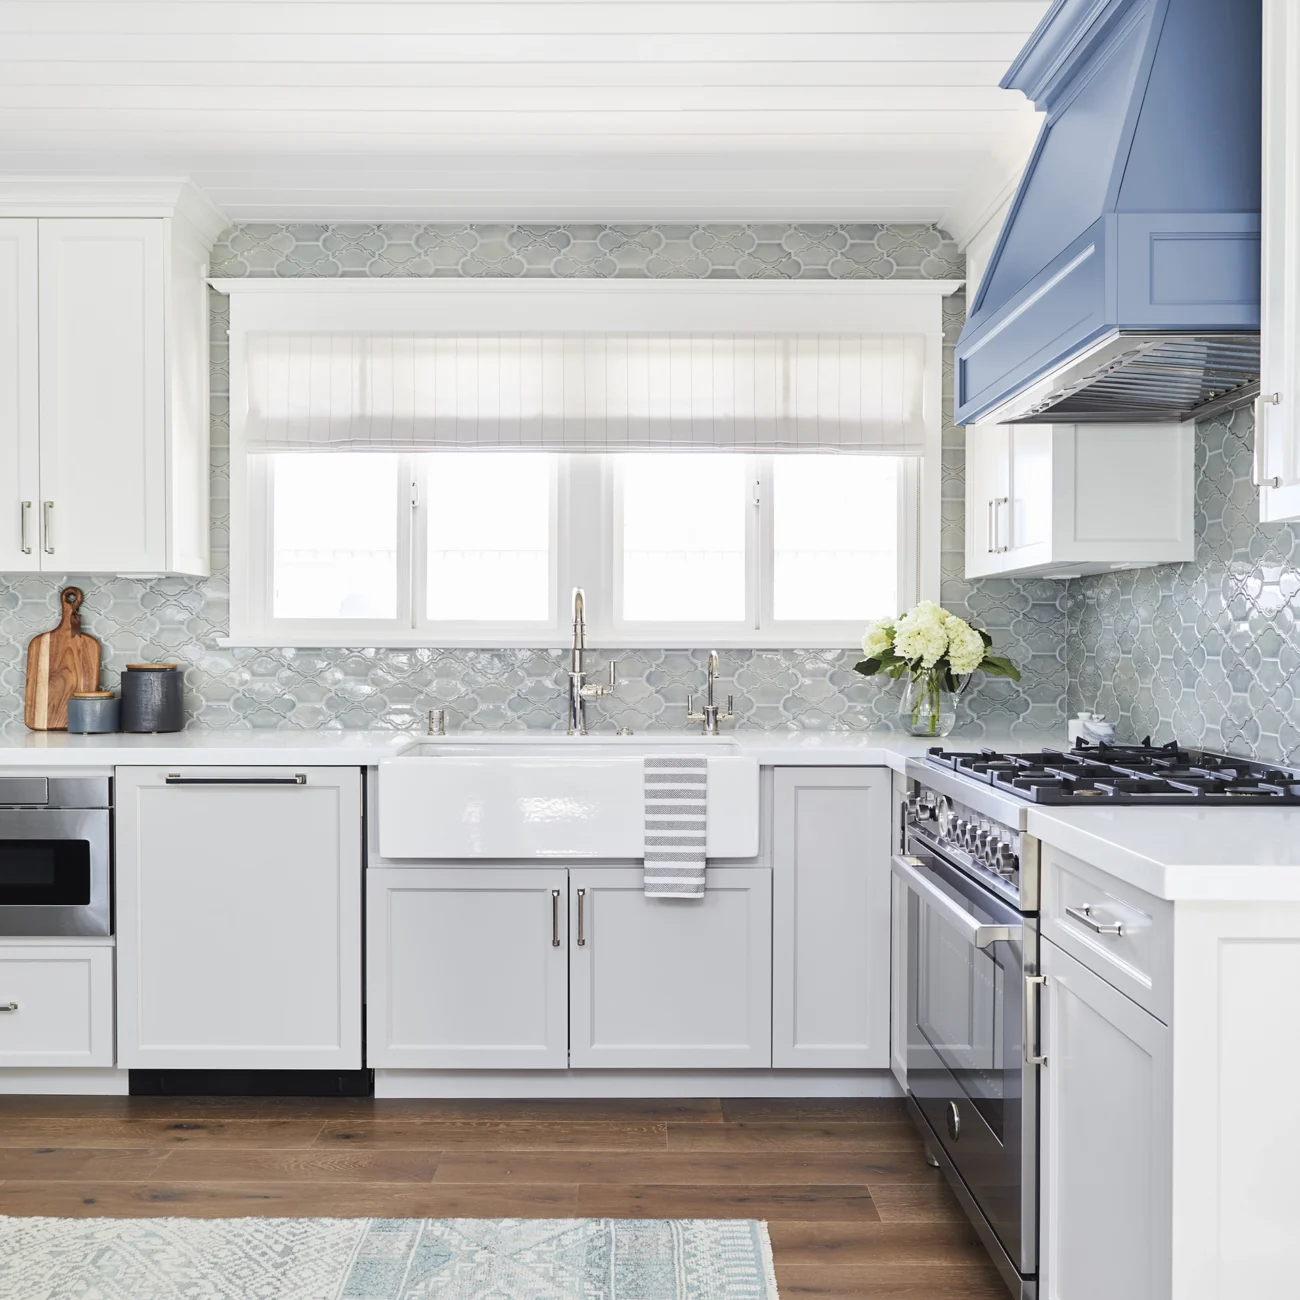 Christine Vroom Interiors | Flournoy | Costal White Kitchen with Blue and White Cabinets